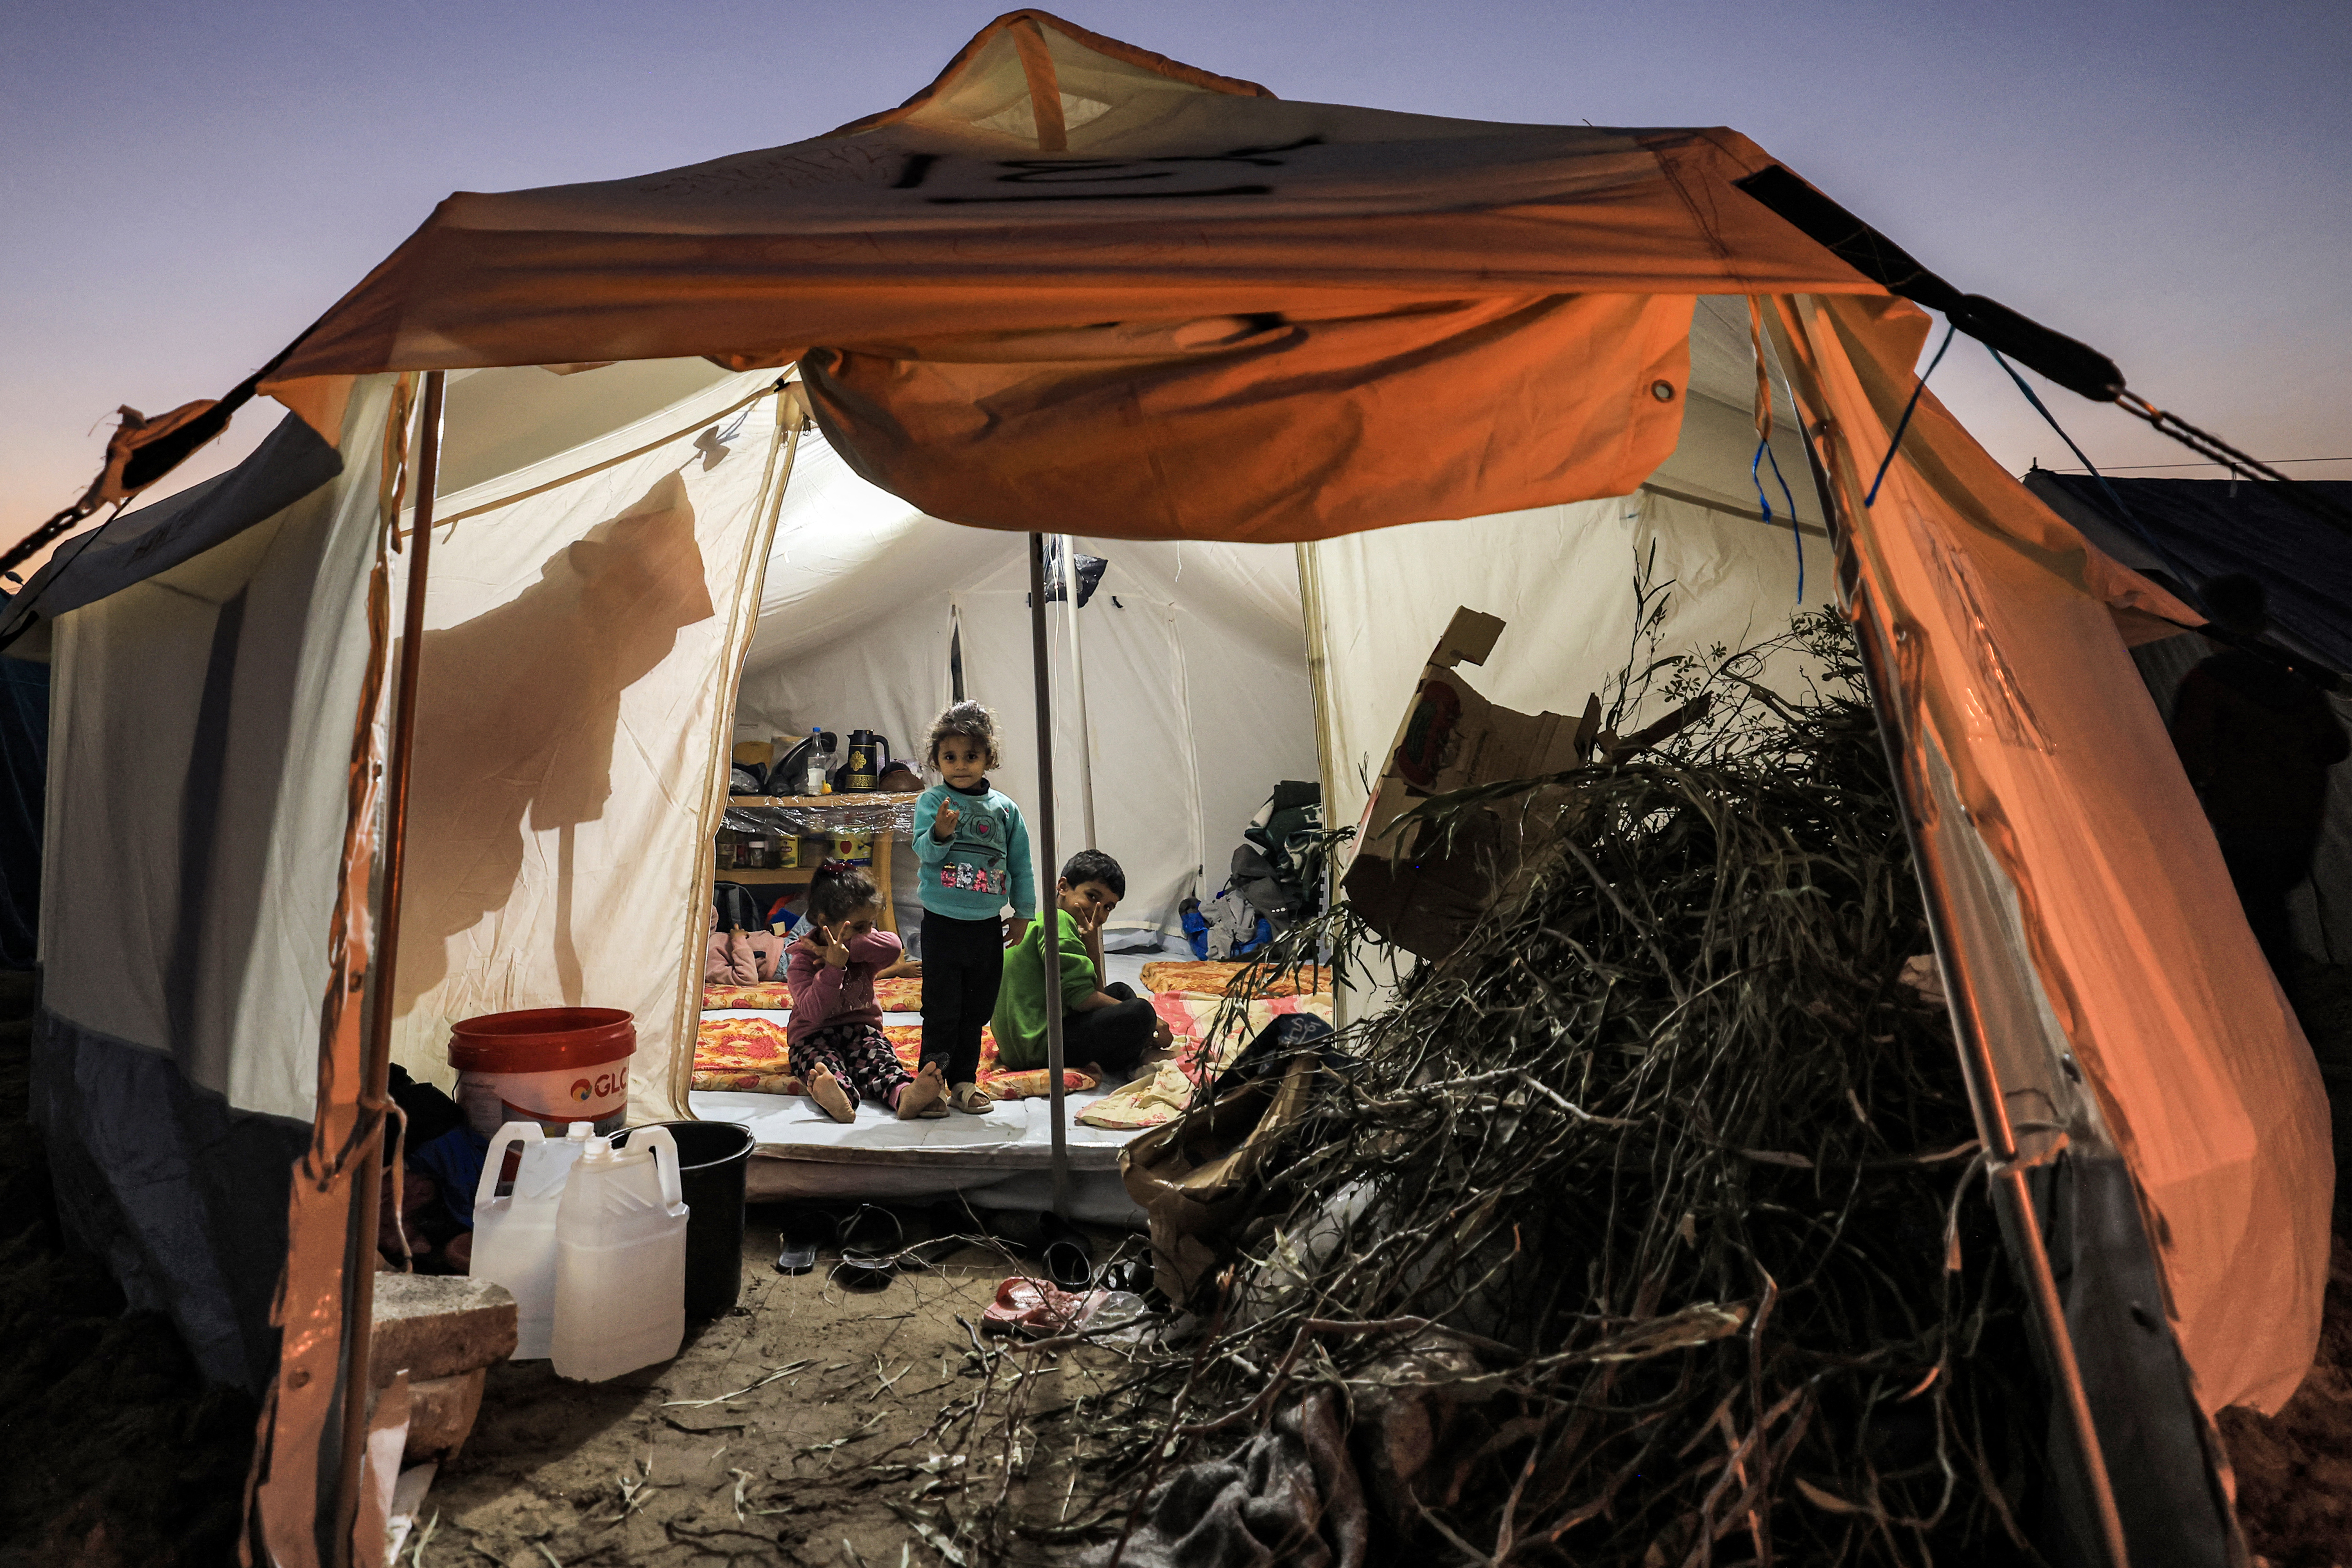 Firewood is placed at the entrance of a tent housing Palestinians displaced by the conflict in Gaza between Israel and the Palestinian Hamas movement, in Rafah in the southern Gaza Strip.
Mahmud Hams/AFP.